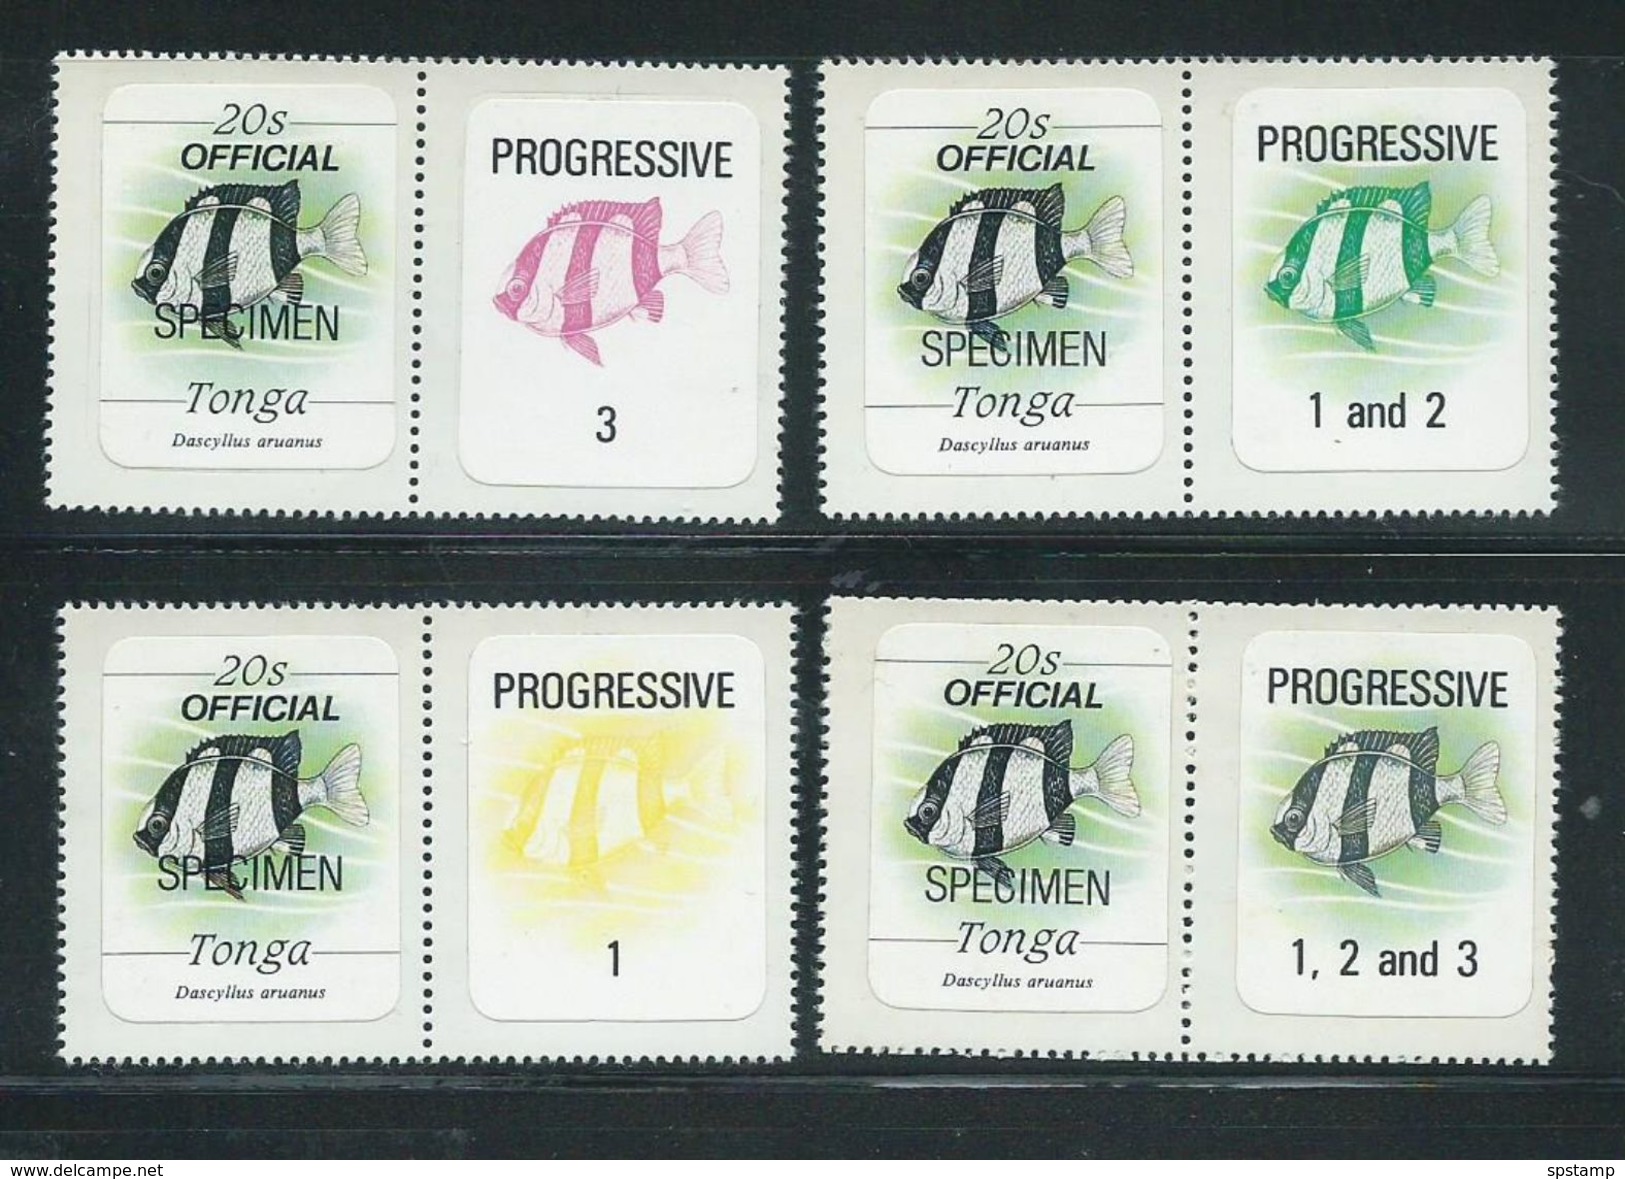 Tonga 1984 Marine Life Official Definitives 20s Fish X 4 Singles , All With Colour Separation Labels , MNH Specimen O/P - Tonga (1970-...)